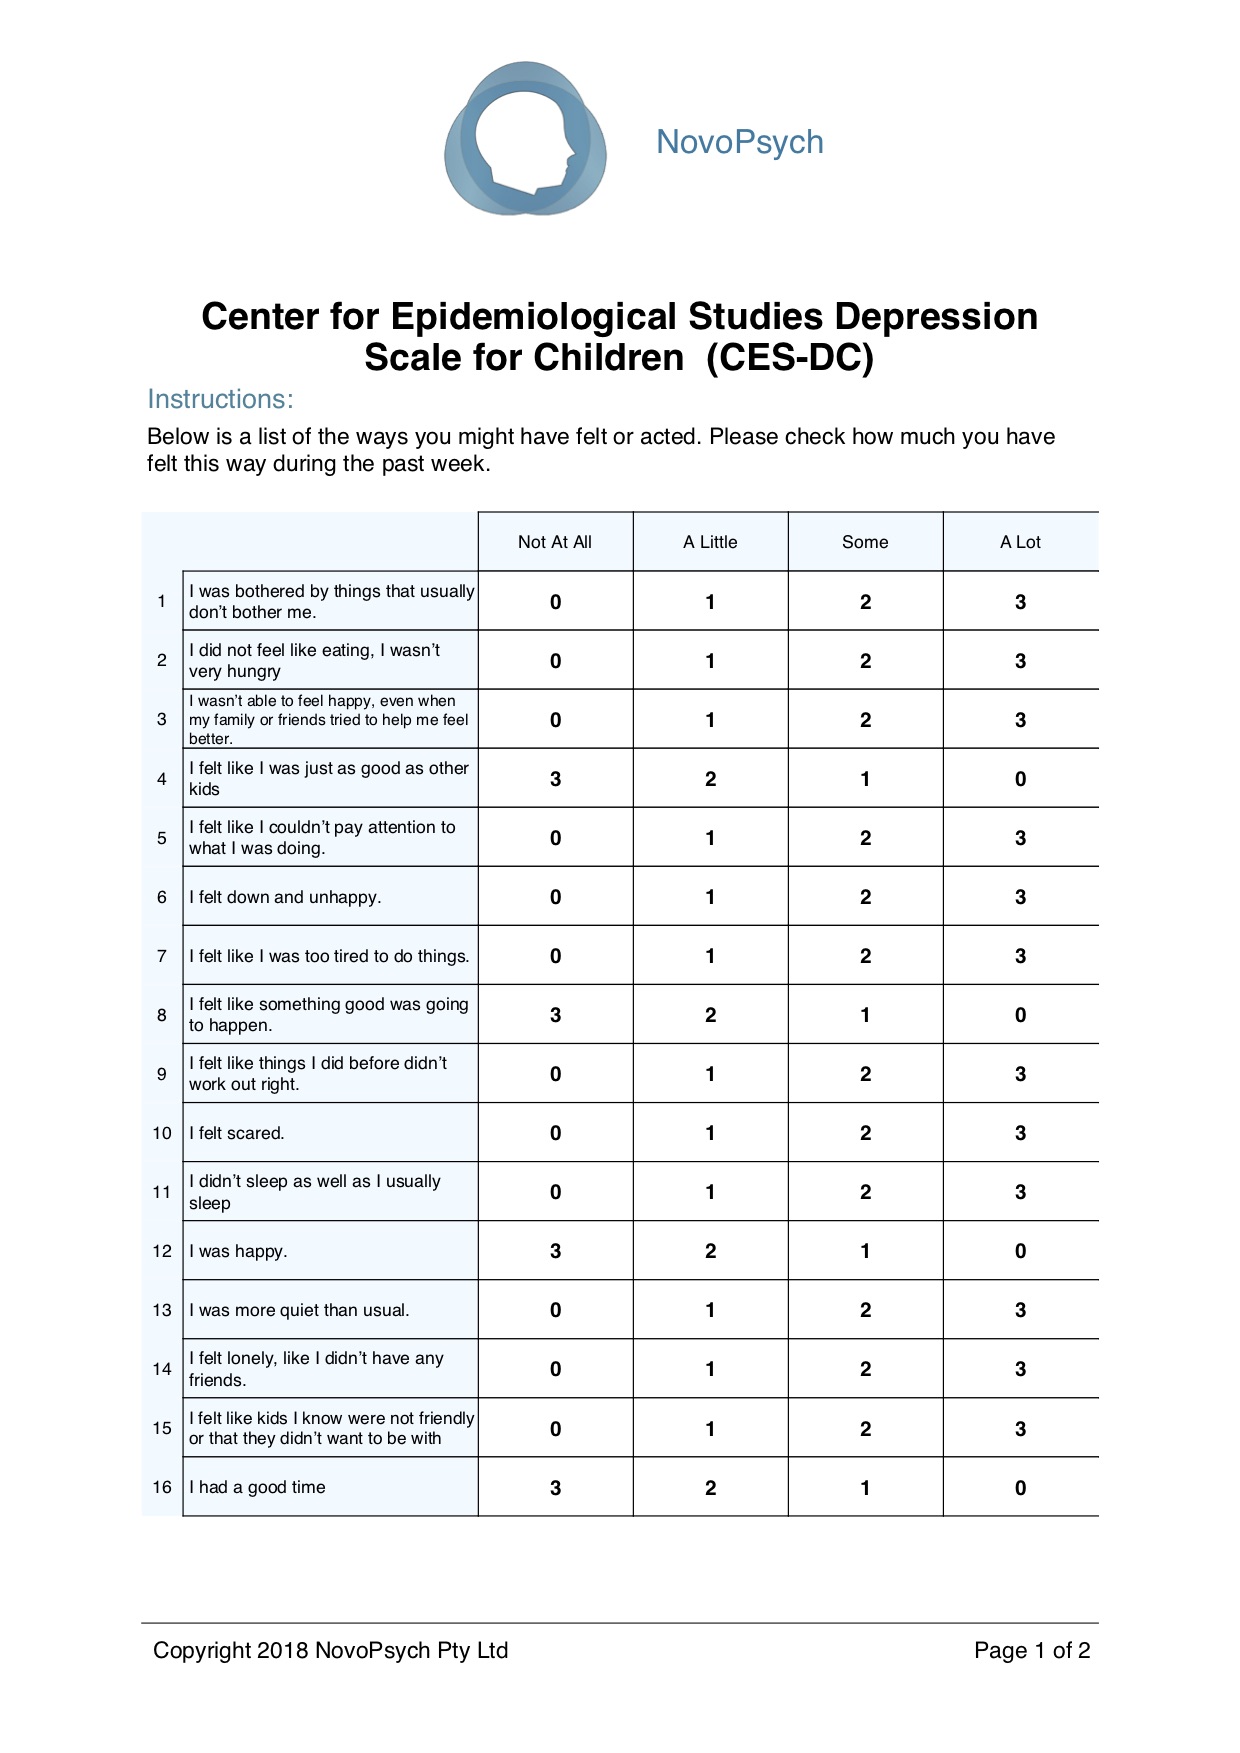 research studies on depression